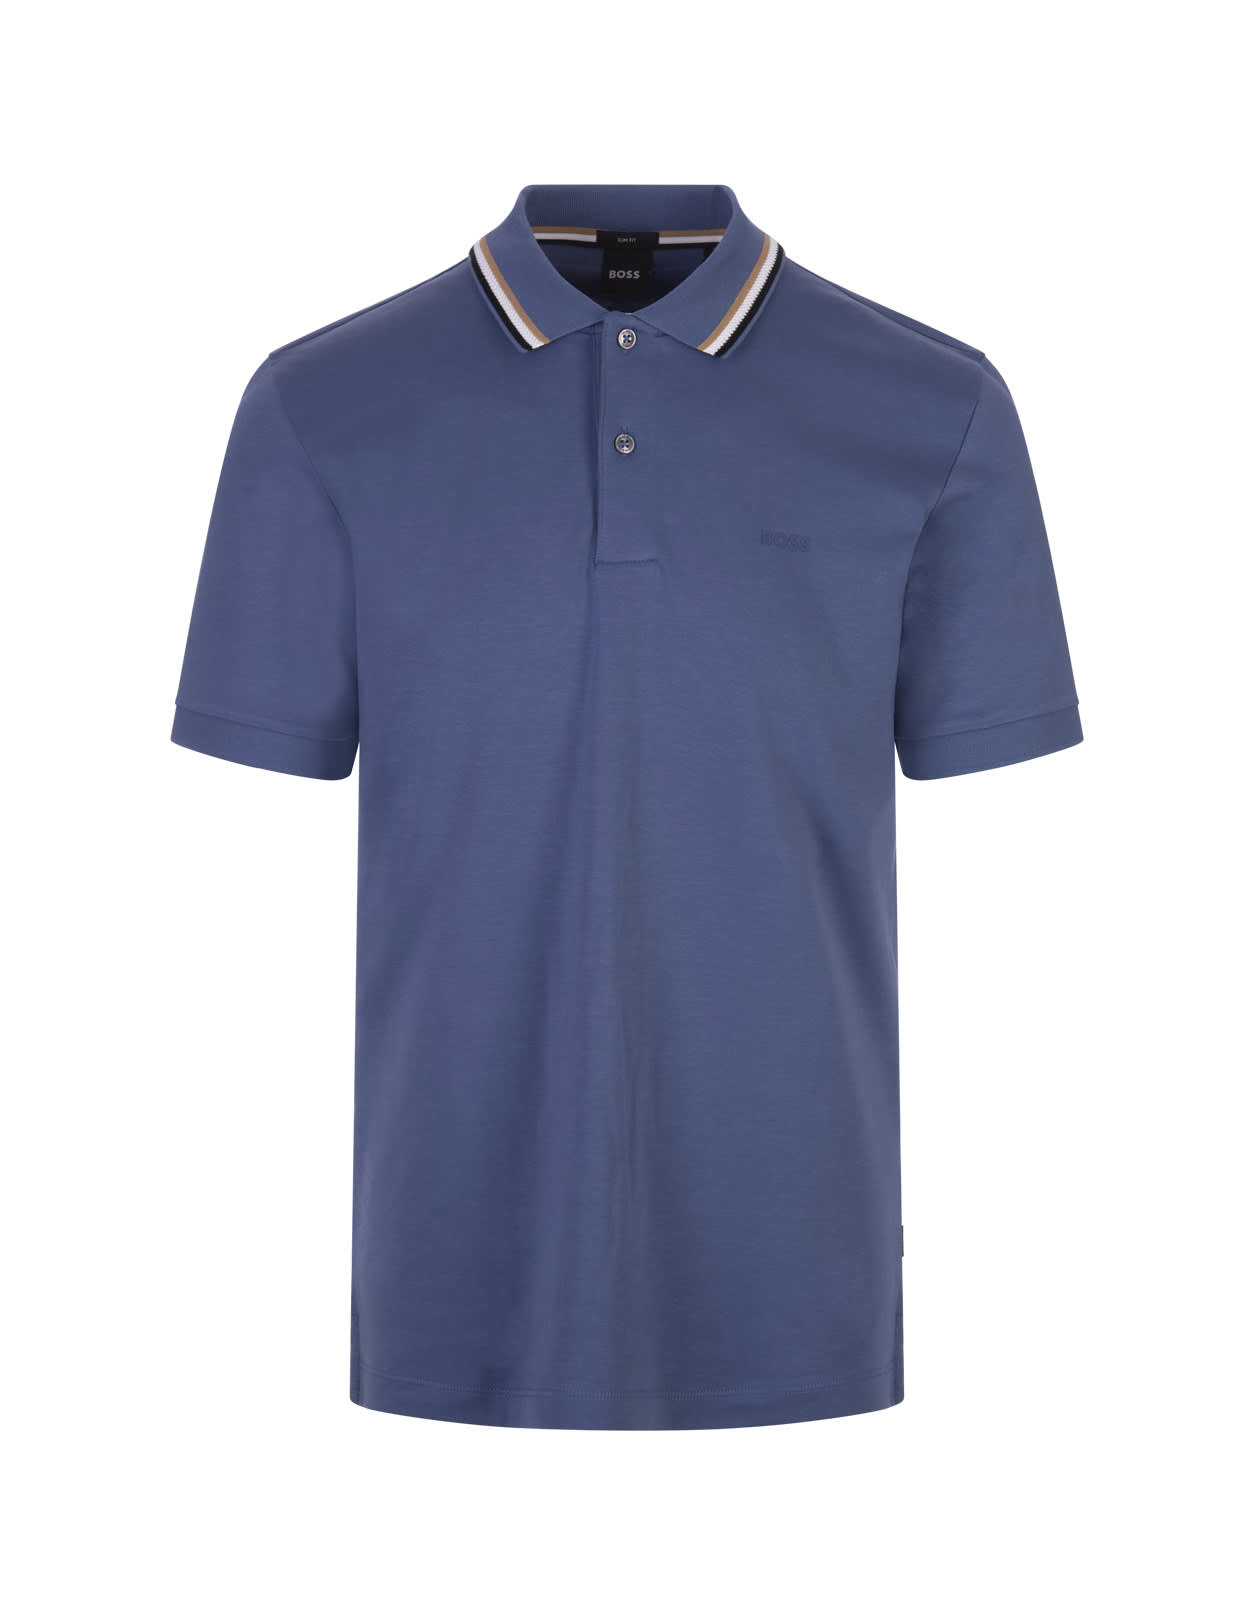 Cerulean Blue Slim Fit Polo Shirt With Striped Collar